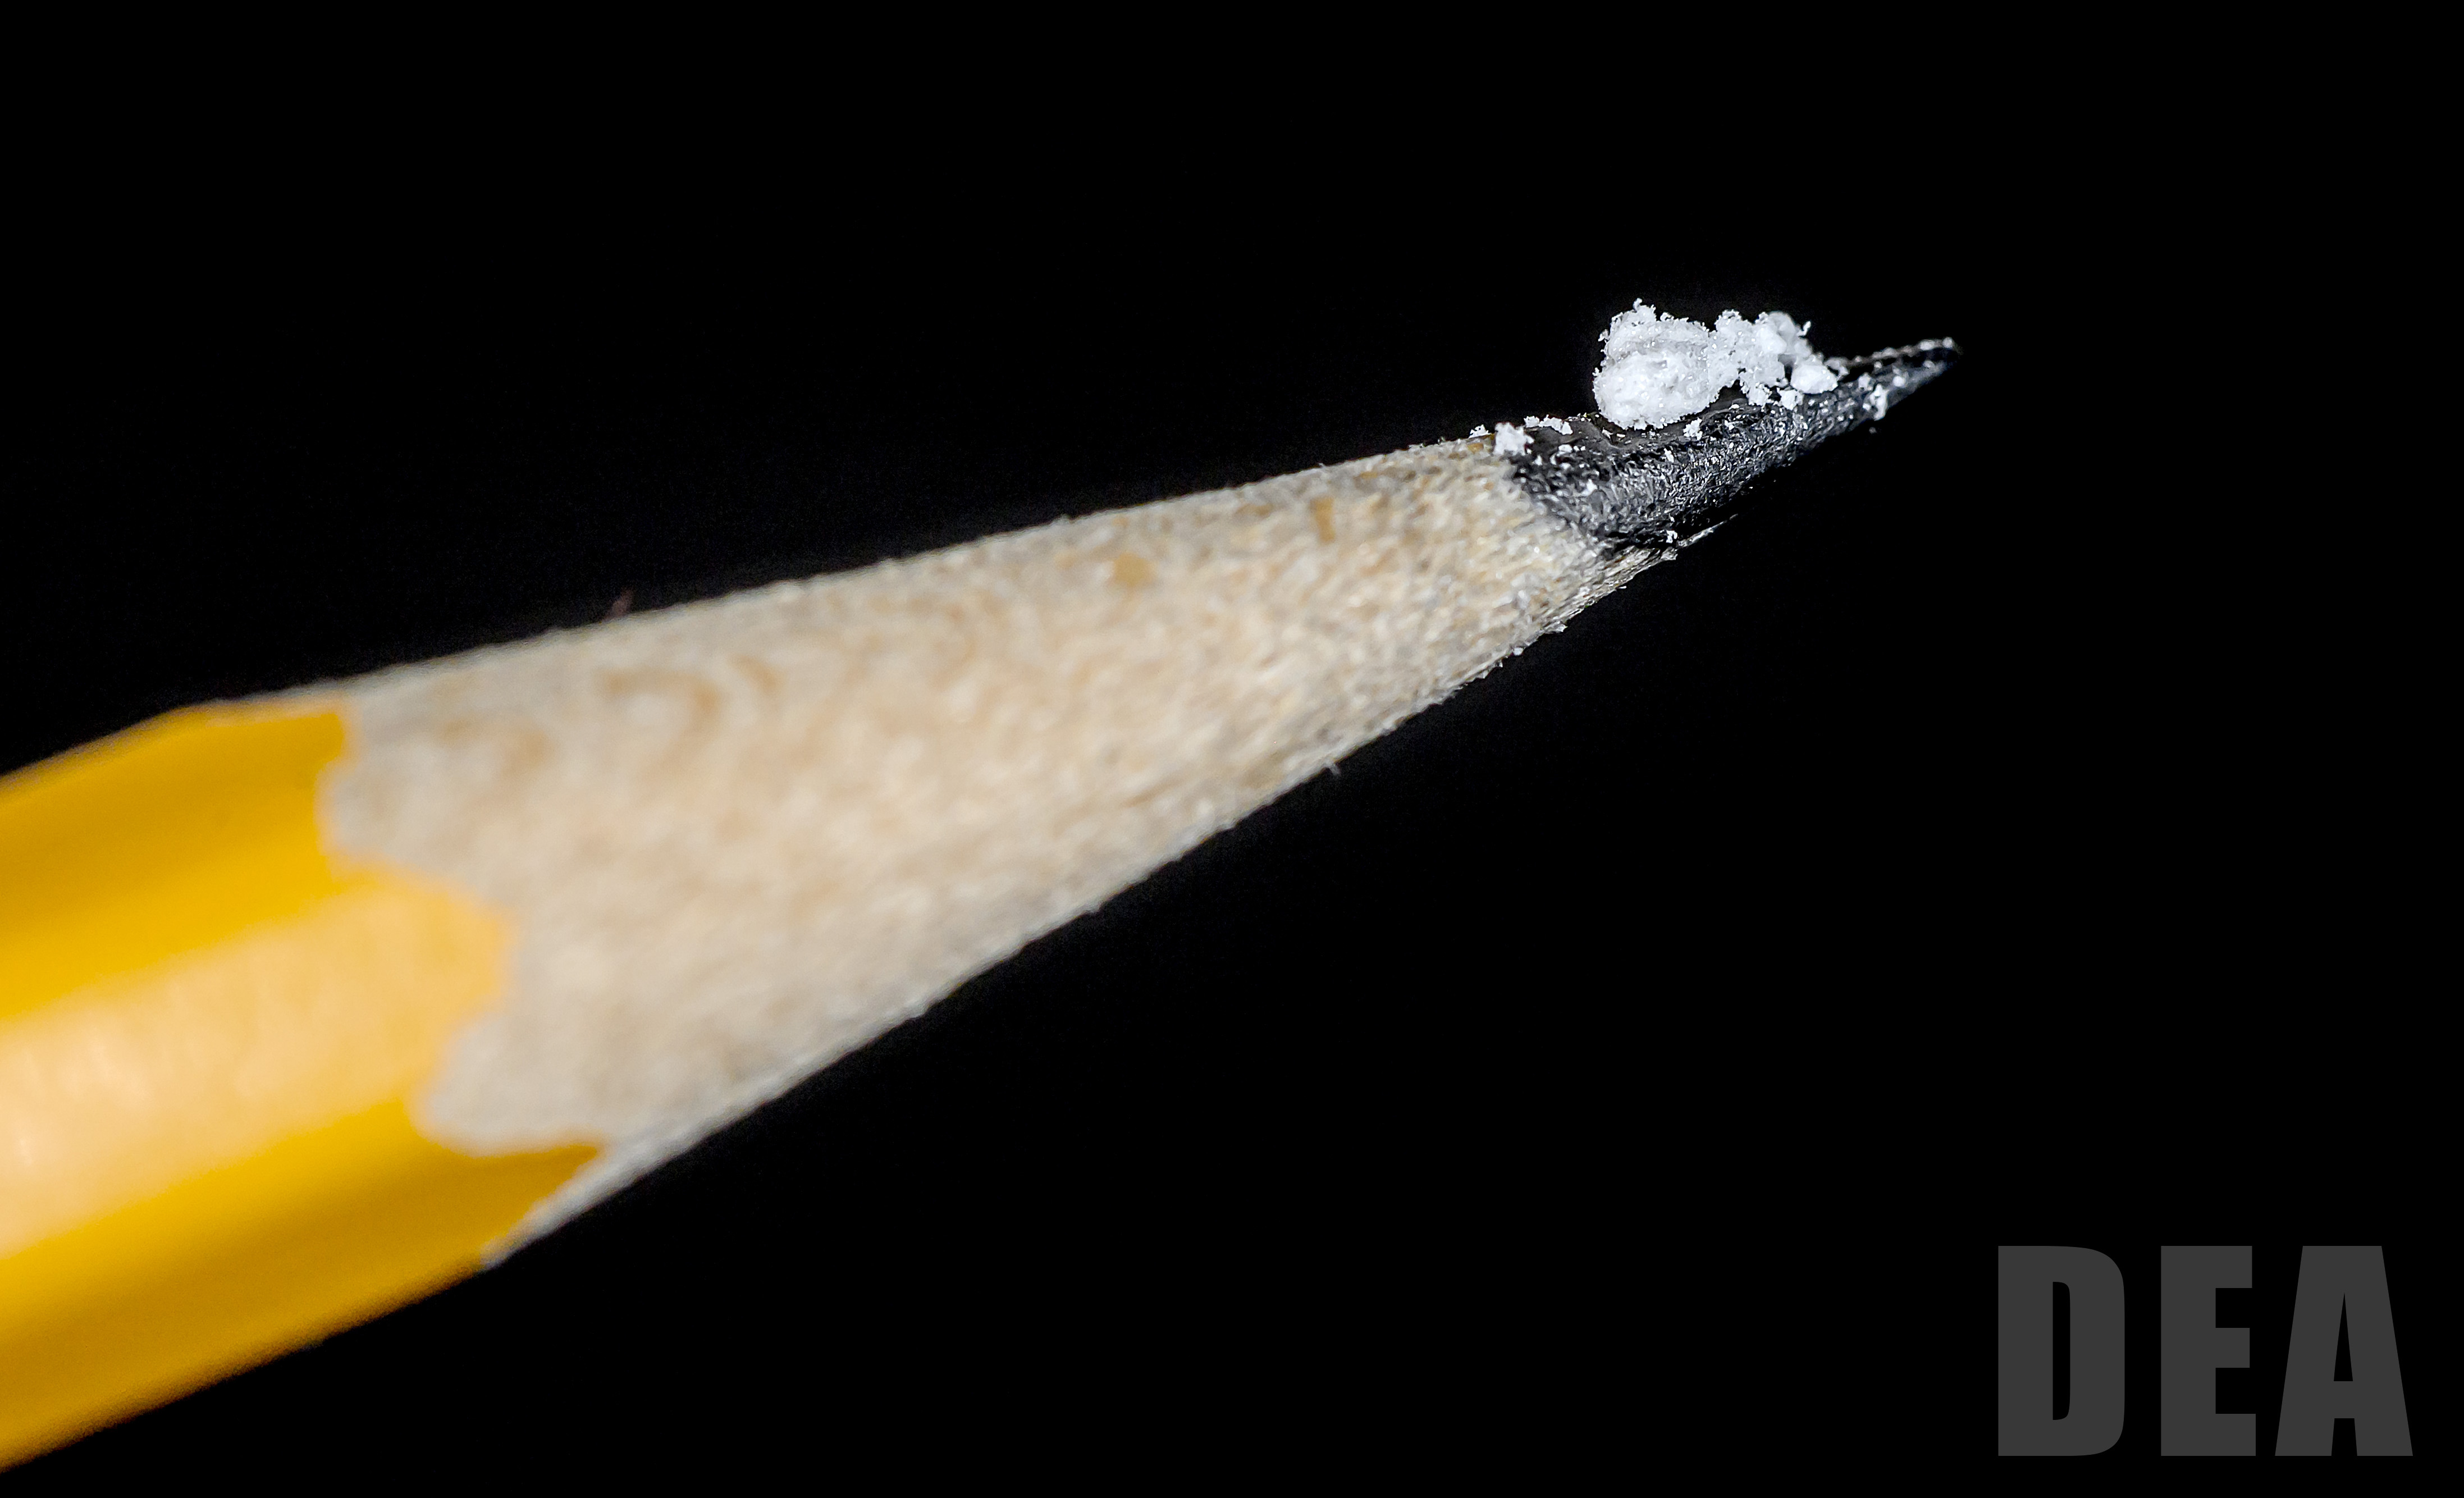 A lethal dose of fentanyl is displayed on the point of a No. 2 pencil, in this image from the DEA’s “One Pill Can Kill” campaign.